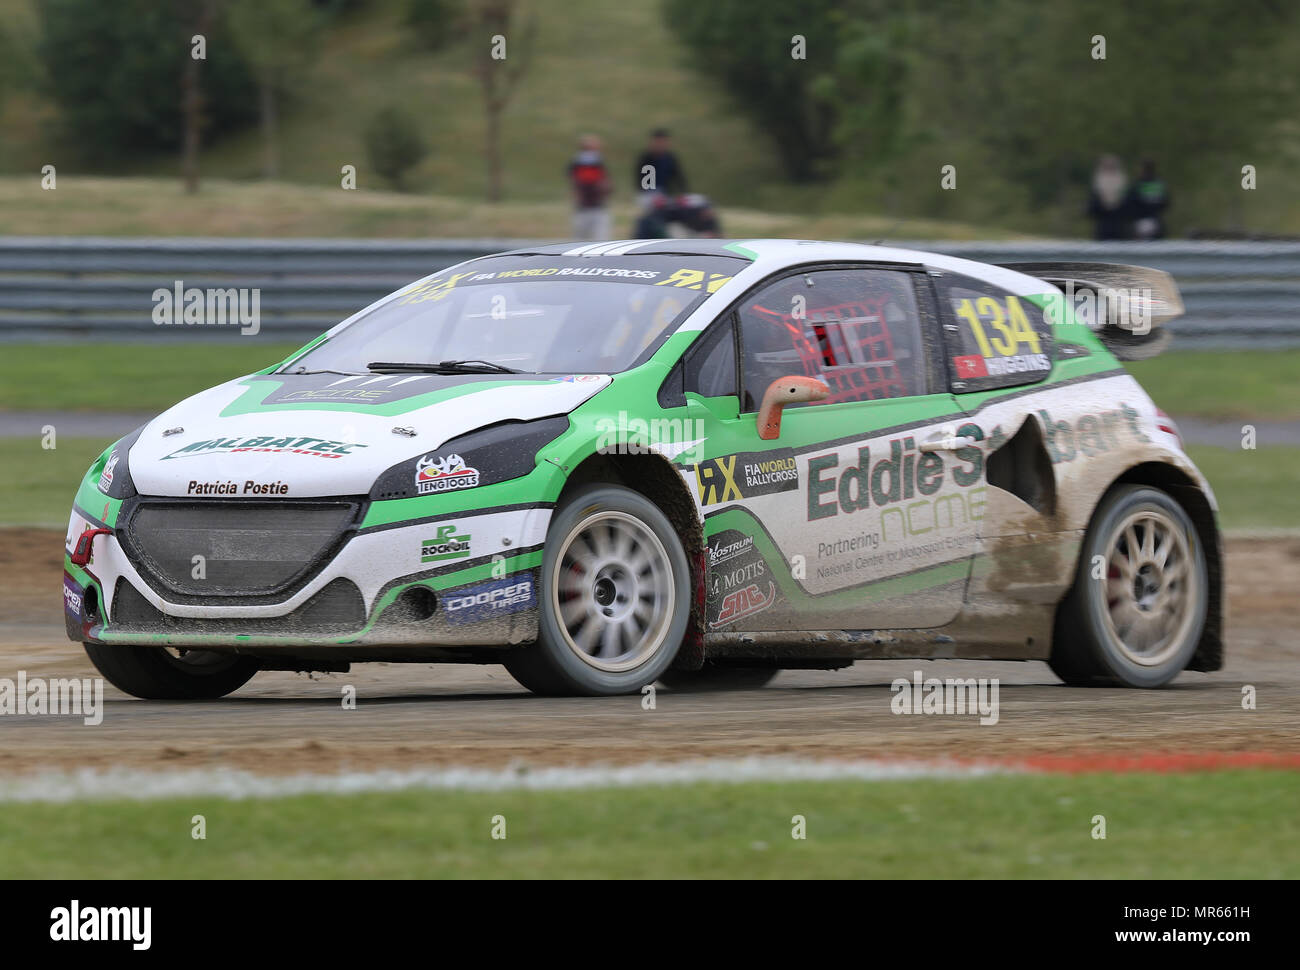 Dave Higgins during day one of the 2018 FIA World Rallycross Championship at Silverstone, Towcester. PRESS ASSOCIATION Photo. Picture date: Friday May 25, 2018. See PA story AUTO Rally. Photo credit should read: David Davies/PA Wire Stock Photo